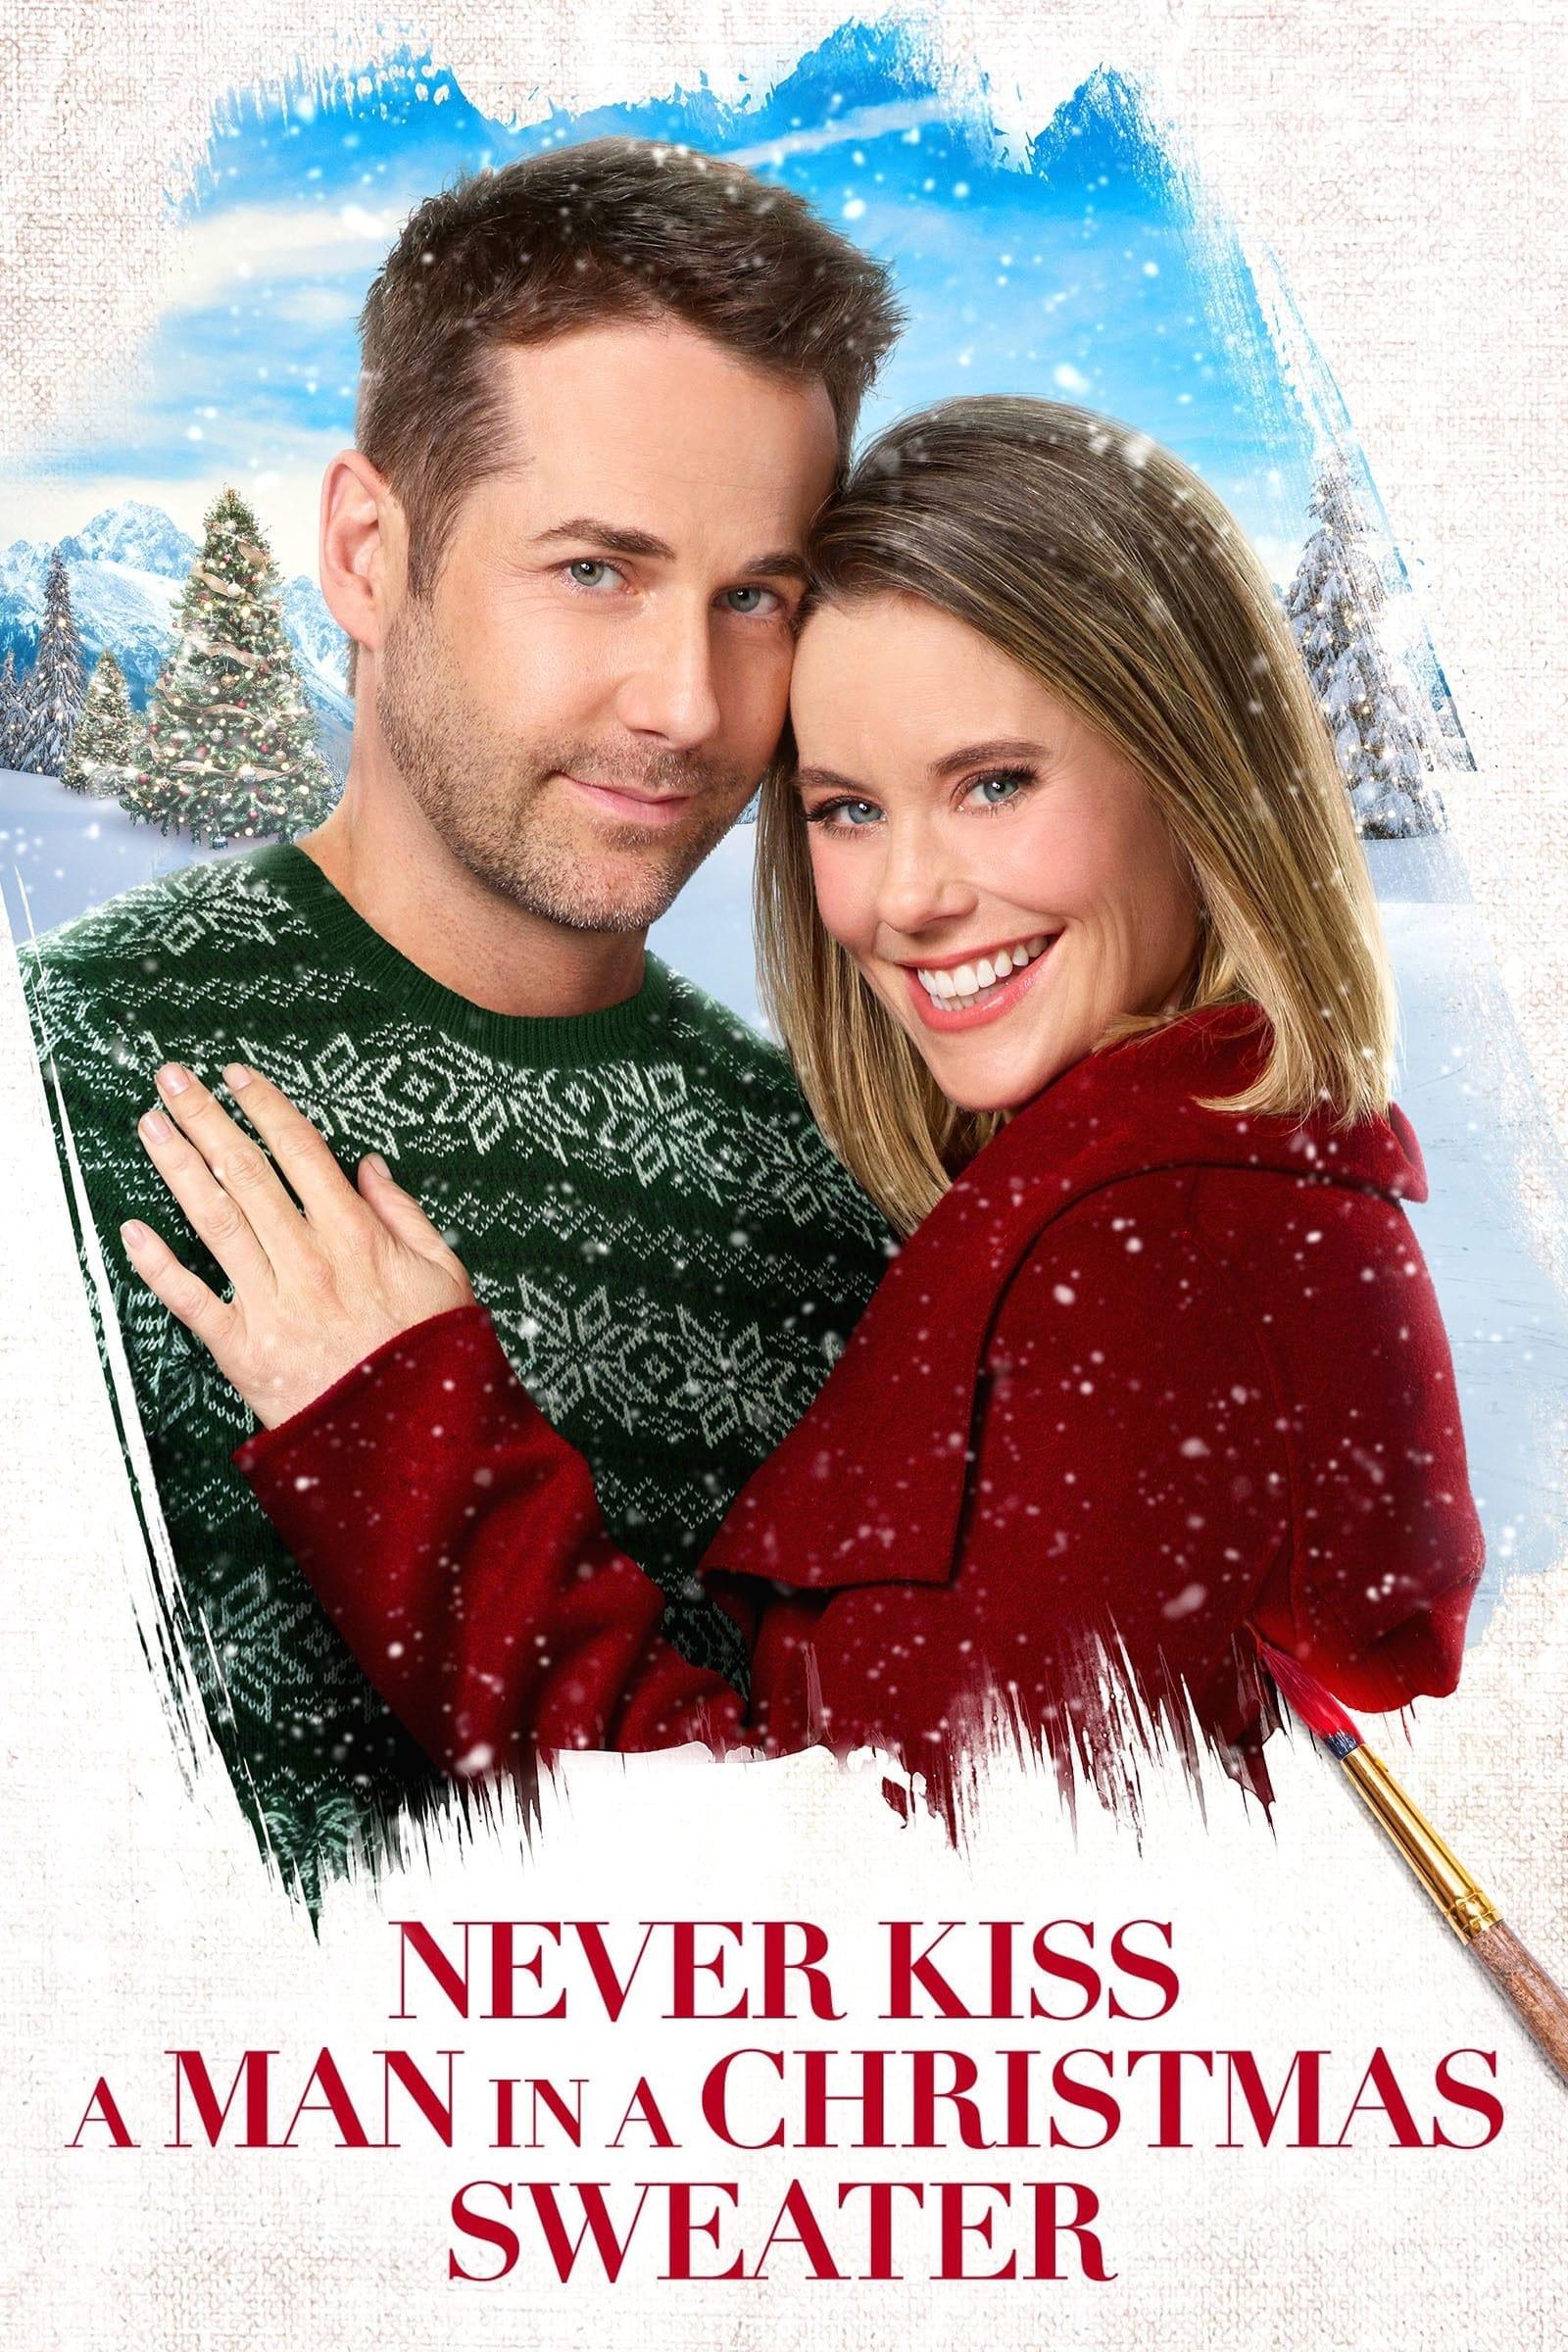 Never Kiss a Man in a Christmas Sweater poster